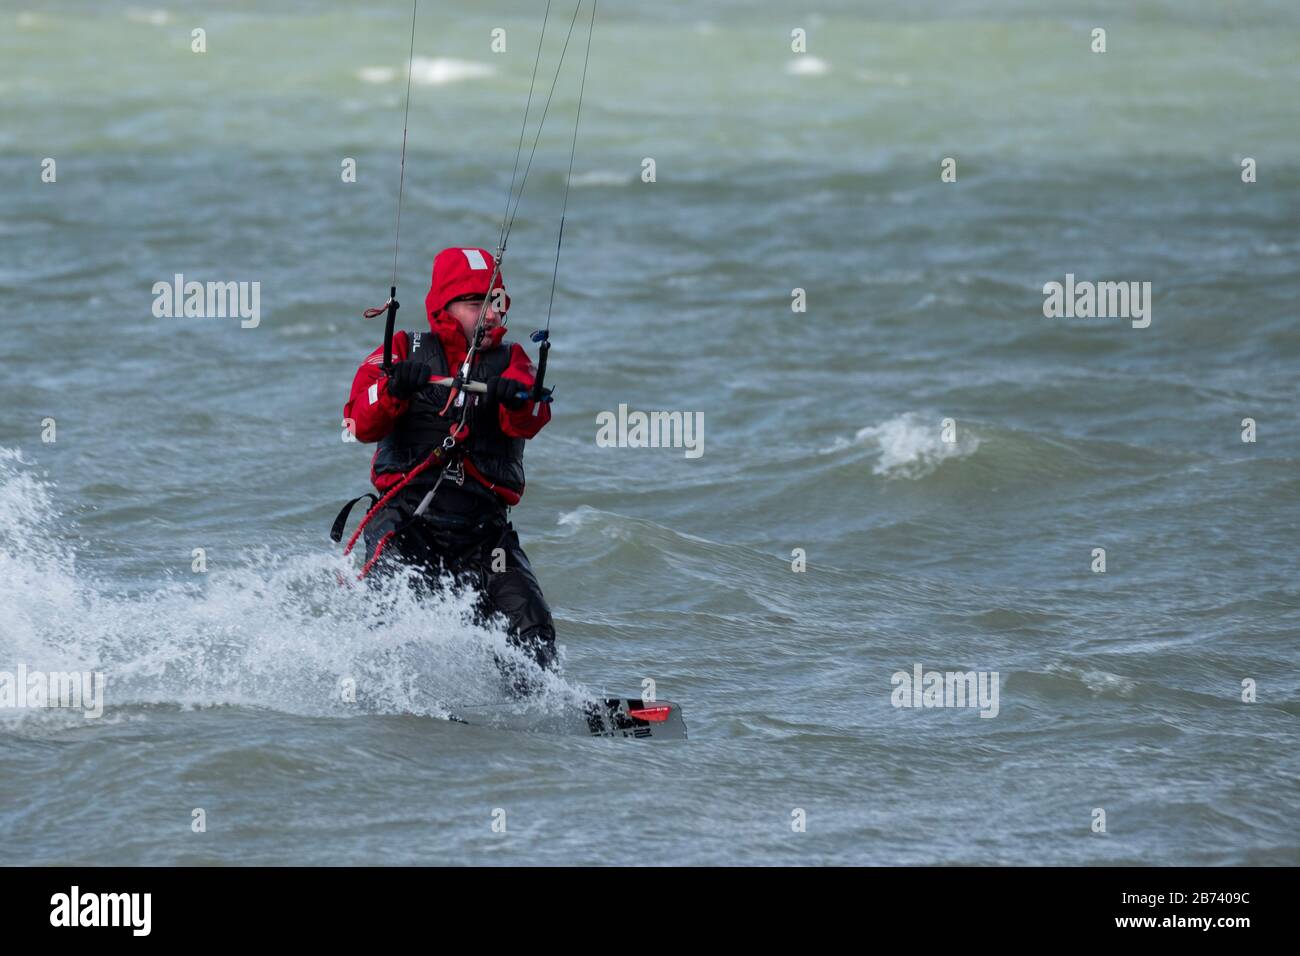 Person Kite Surfer on open water Stock Photo